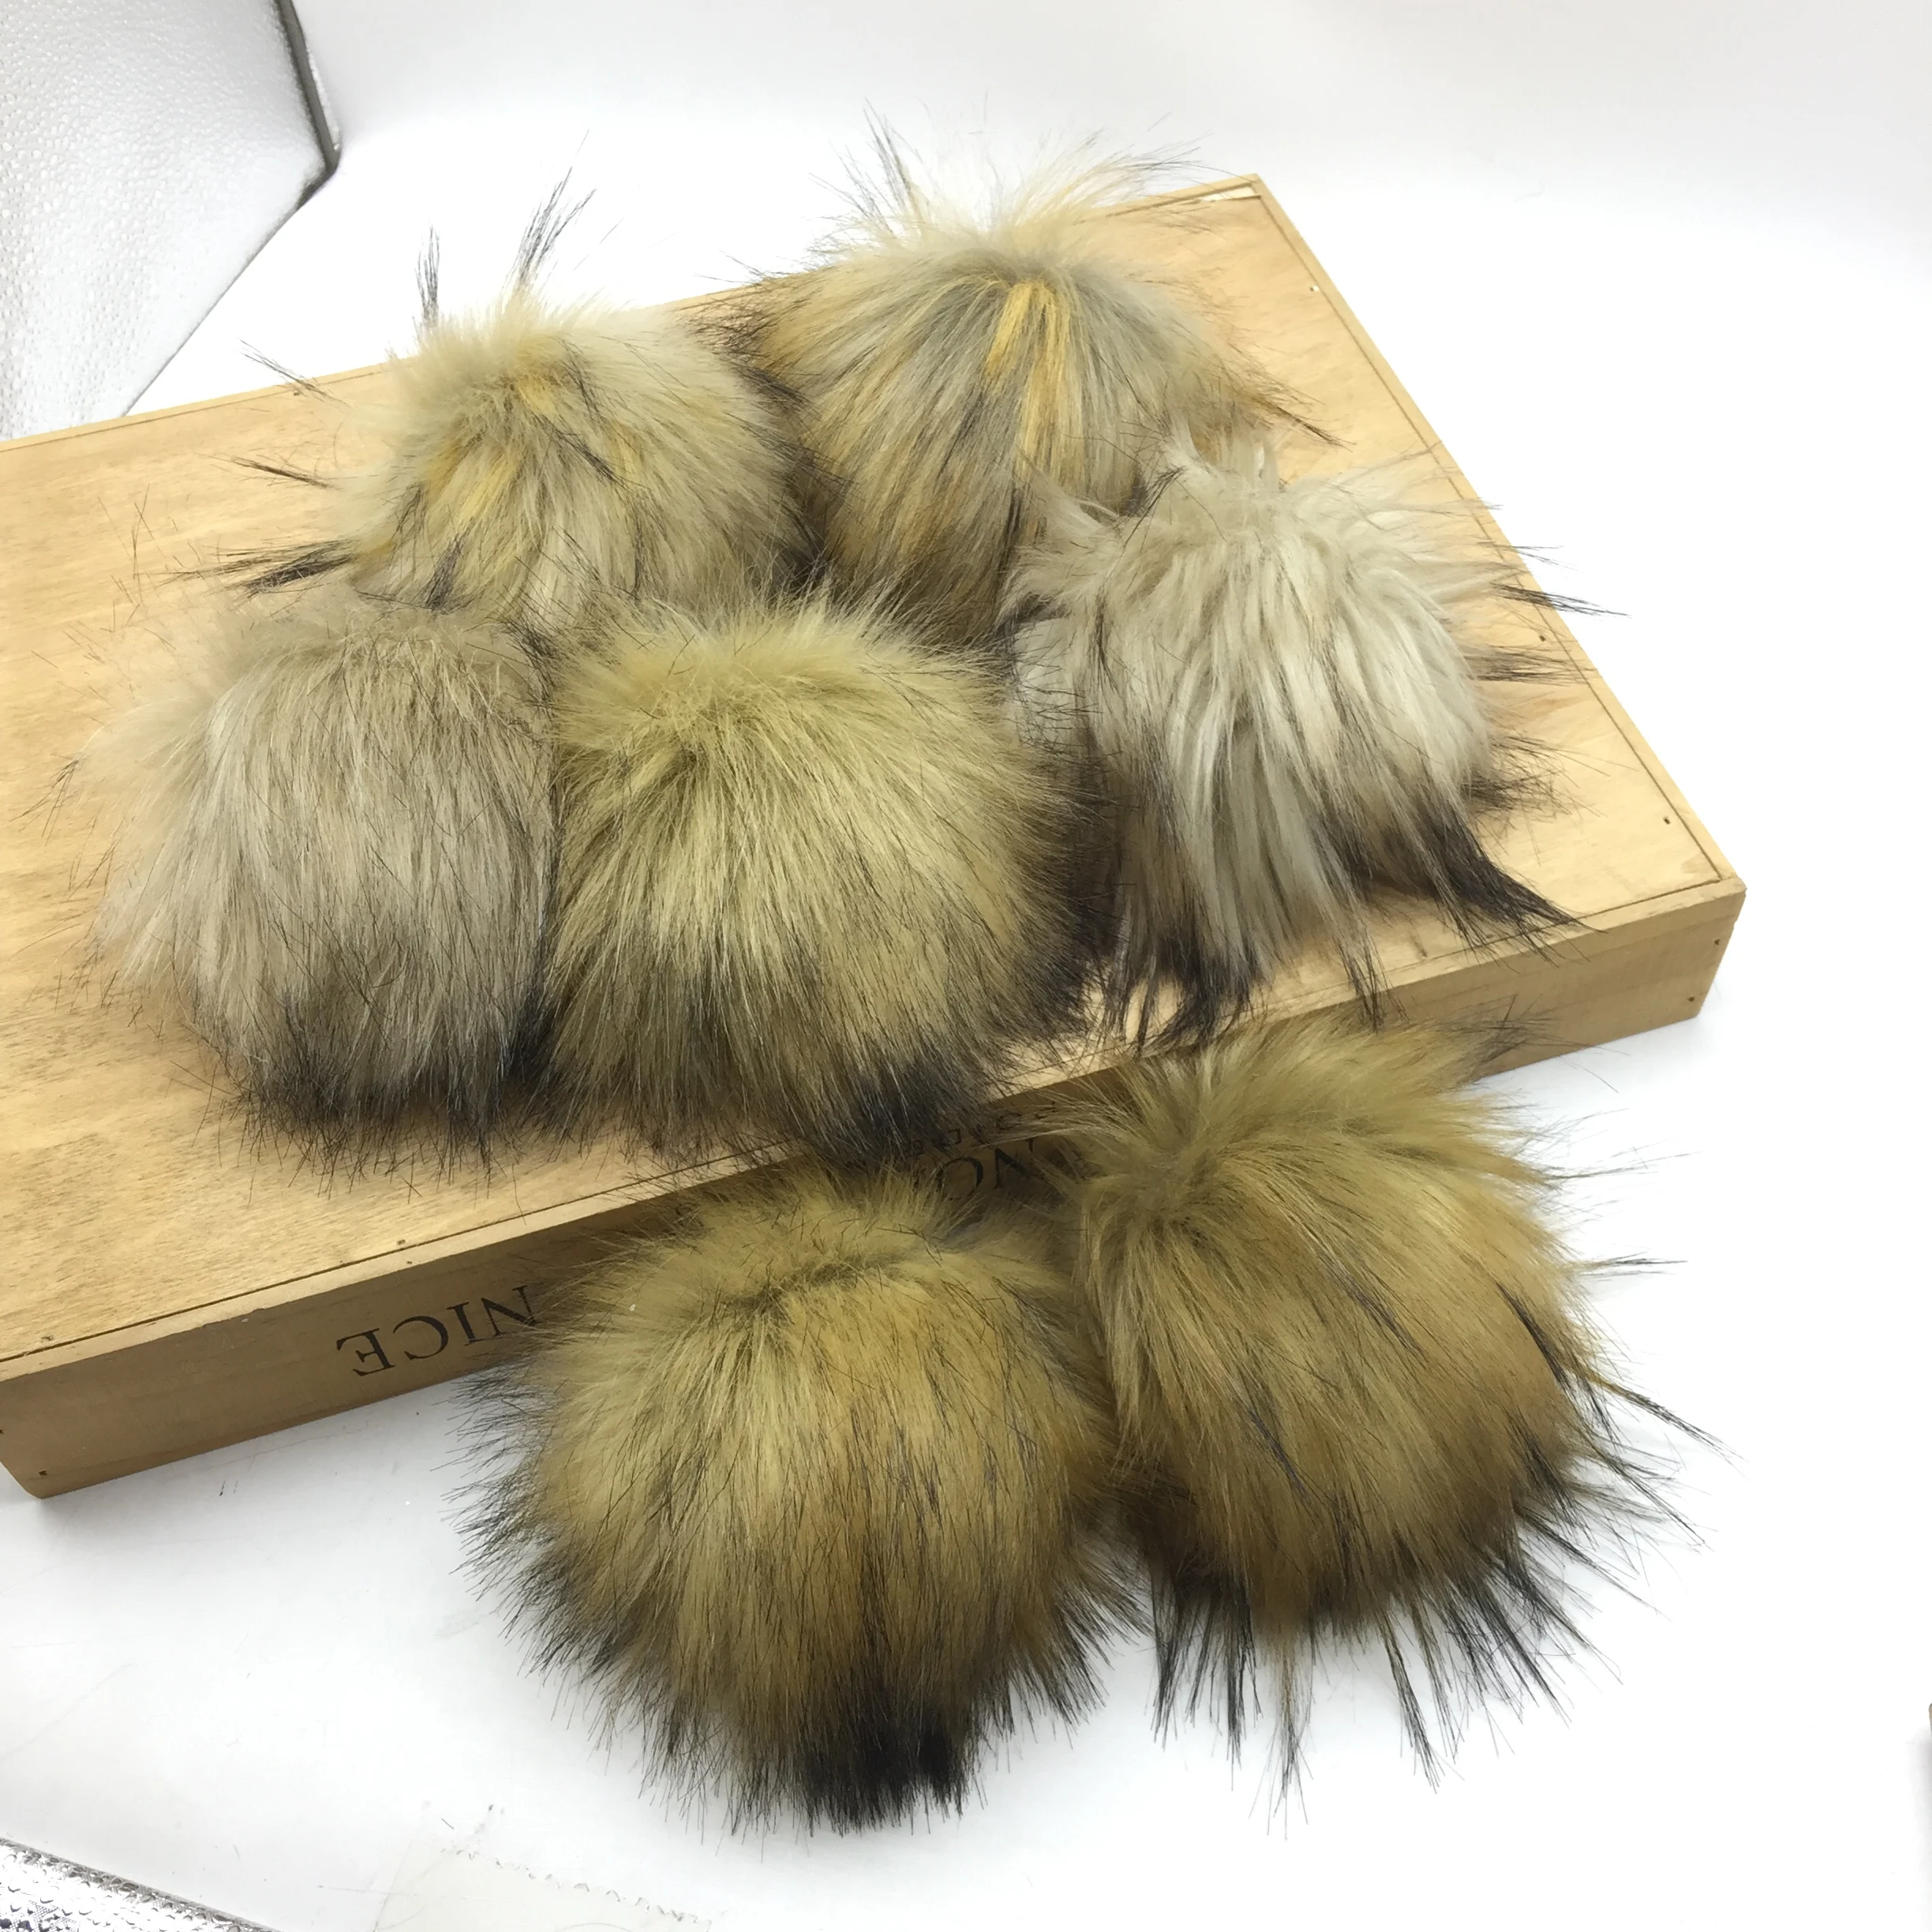 12 cm fox fur ball pink pom pom winter hat real fur accessories For Hats Bags Shoes Scarves Accessories